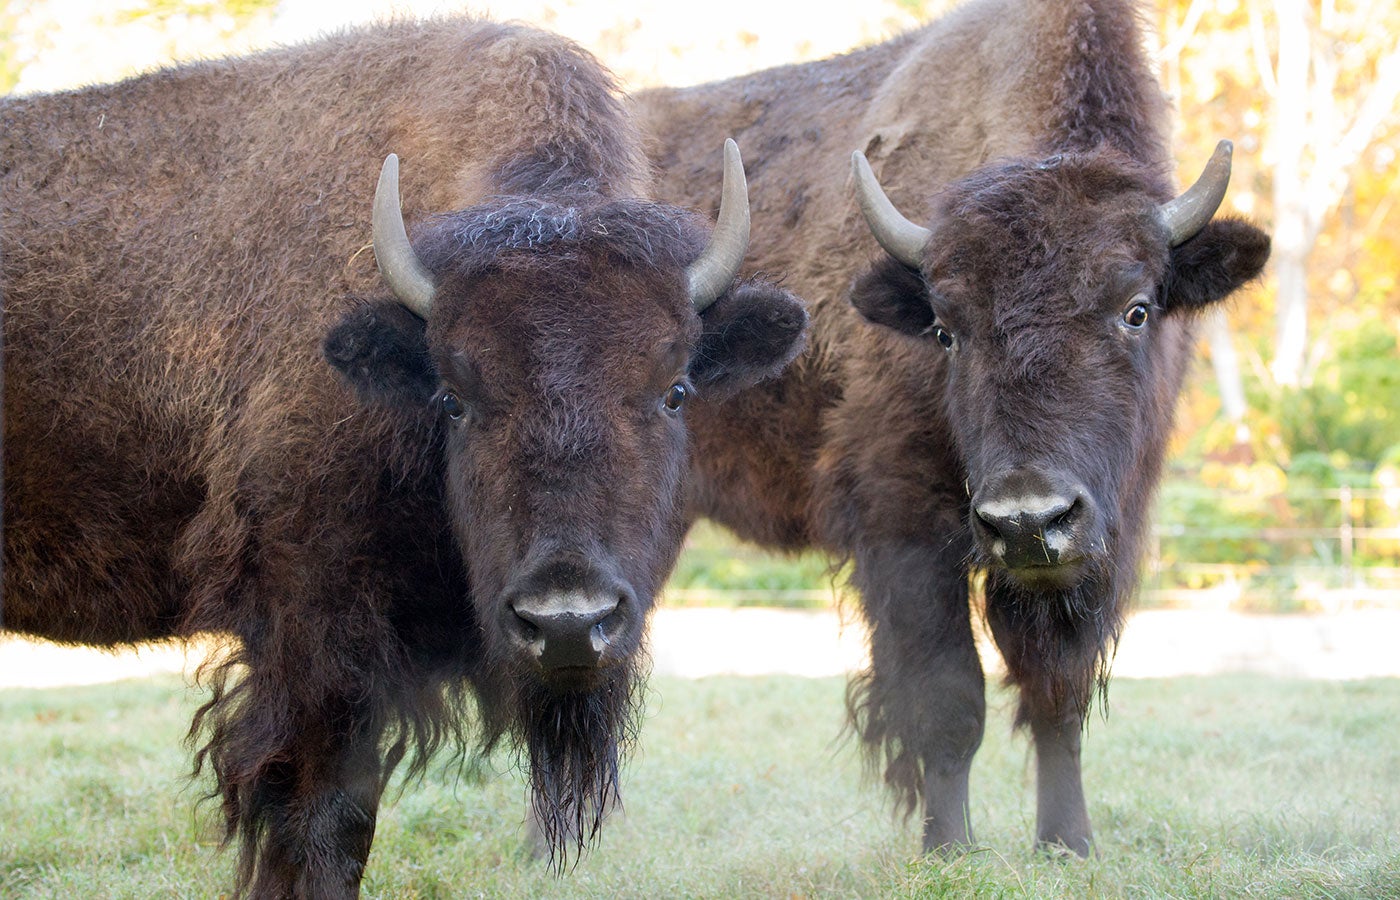 Two American bison with short, curved horns, thick coats and cloven hooves stand in the grass